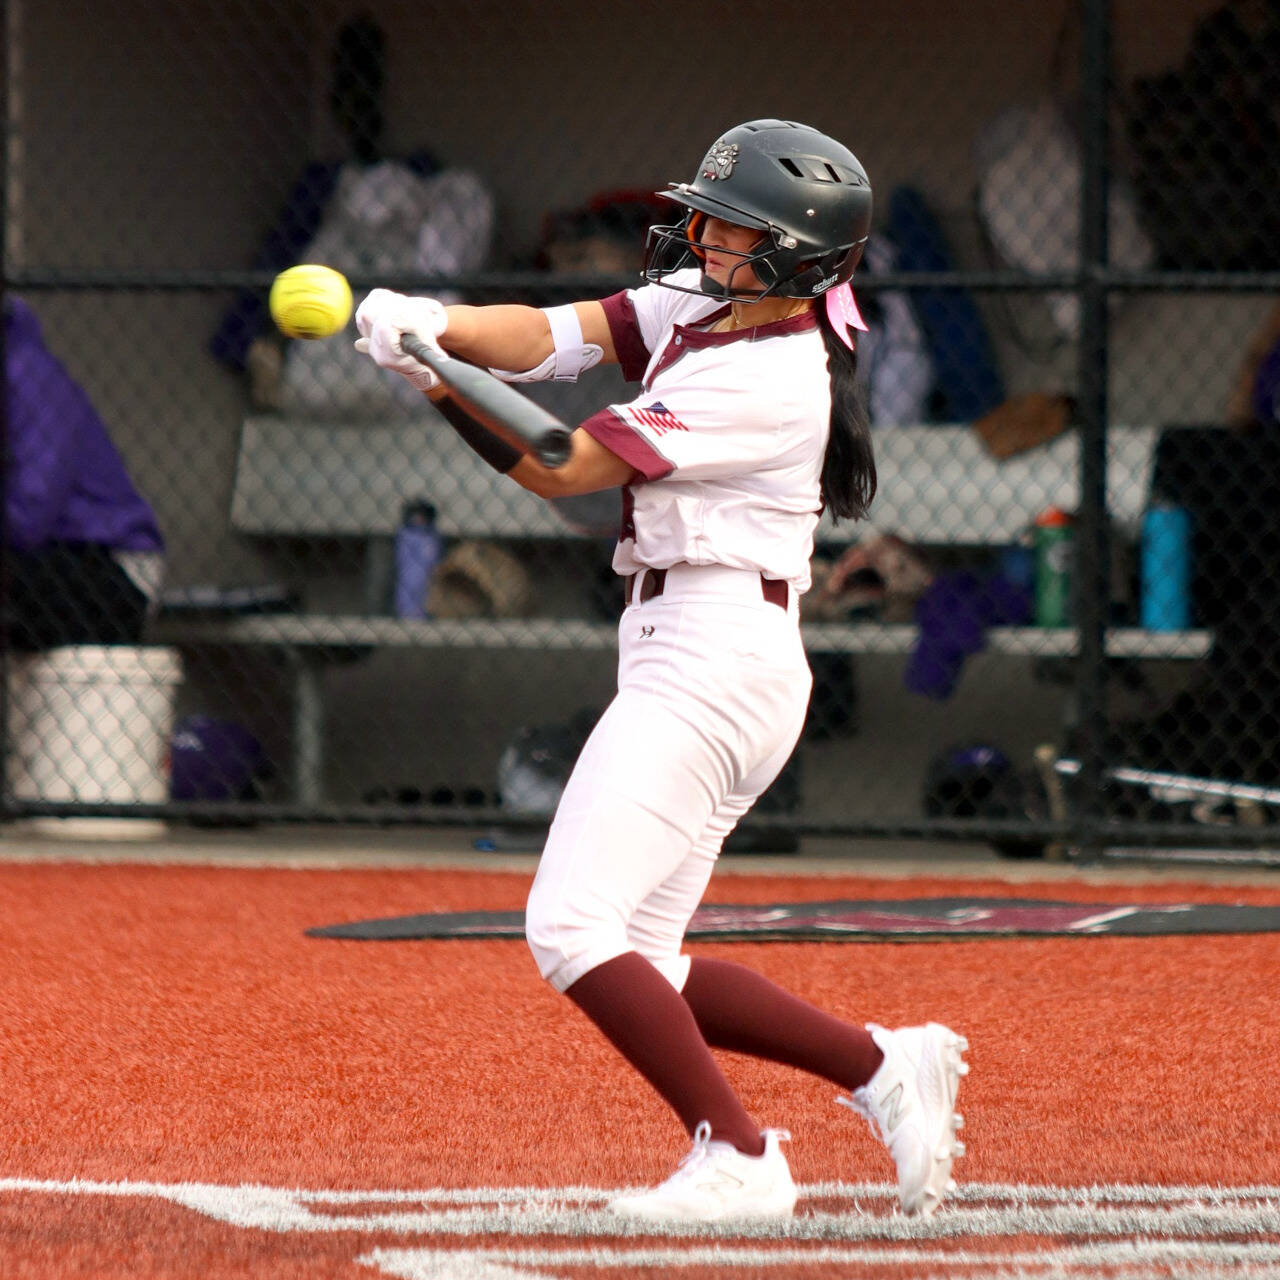 PHOTO BY HAILEY BLANCAS Montesano’s Adda Potts drives in a run during a 12-1 loss to Puyallup on Saturday at Dick Tagman Field in Montesano.